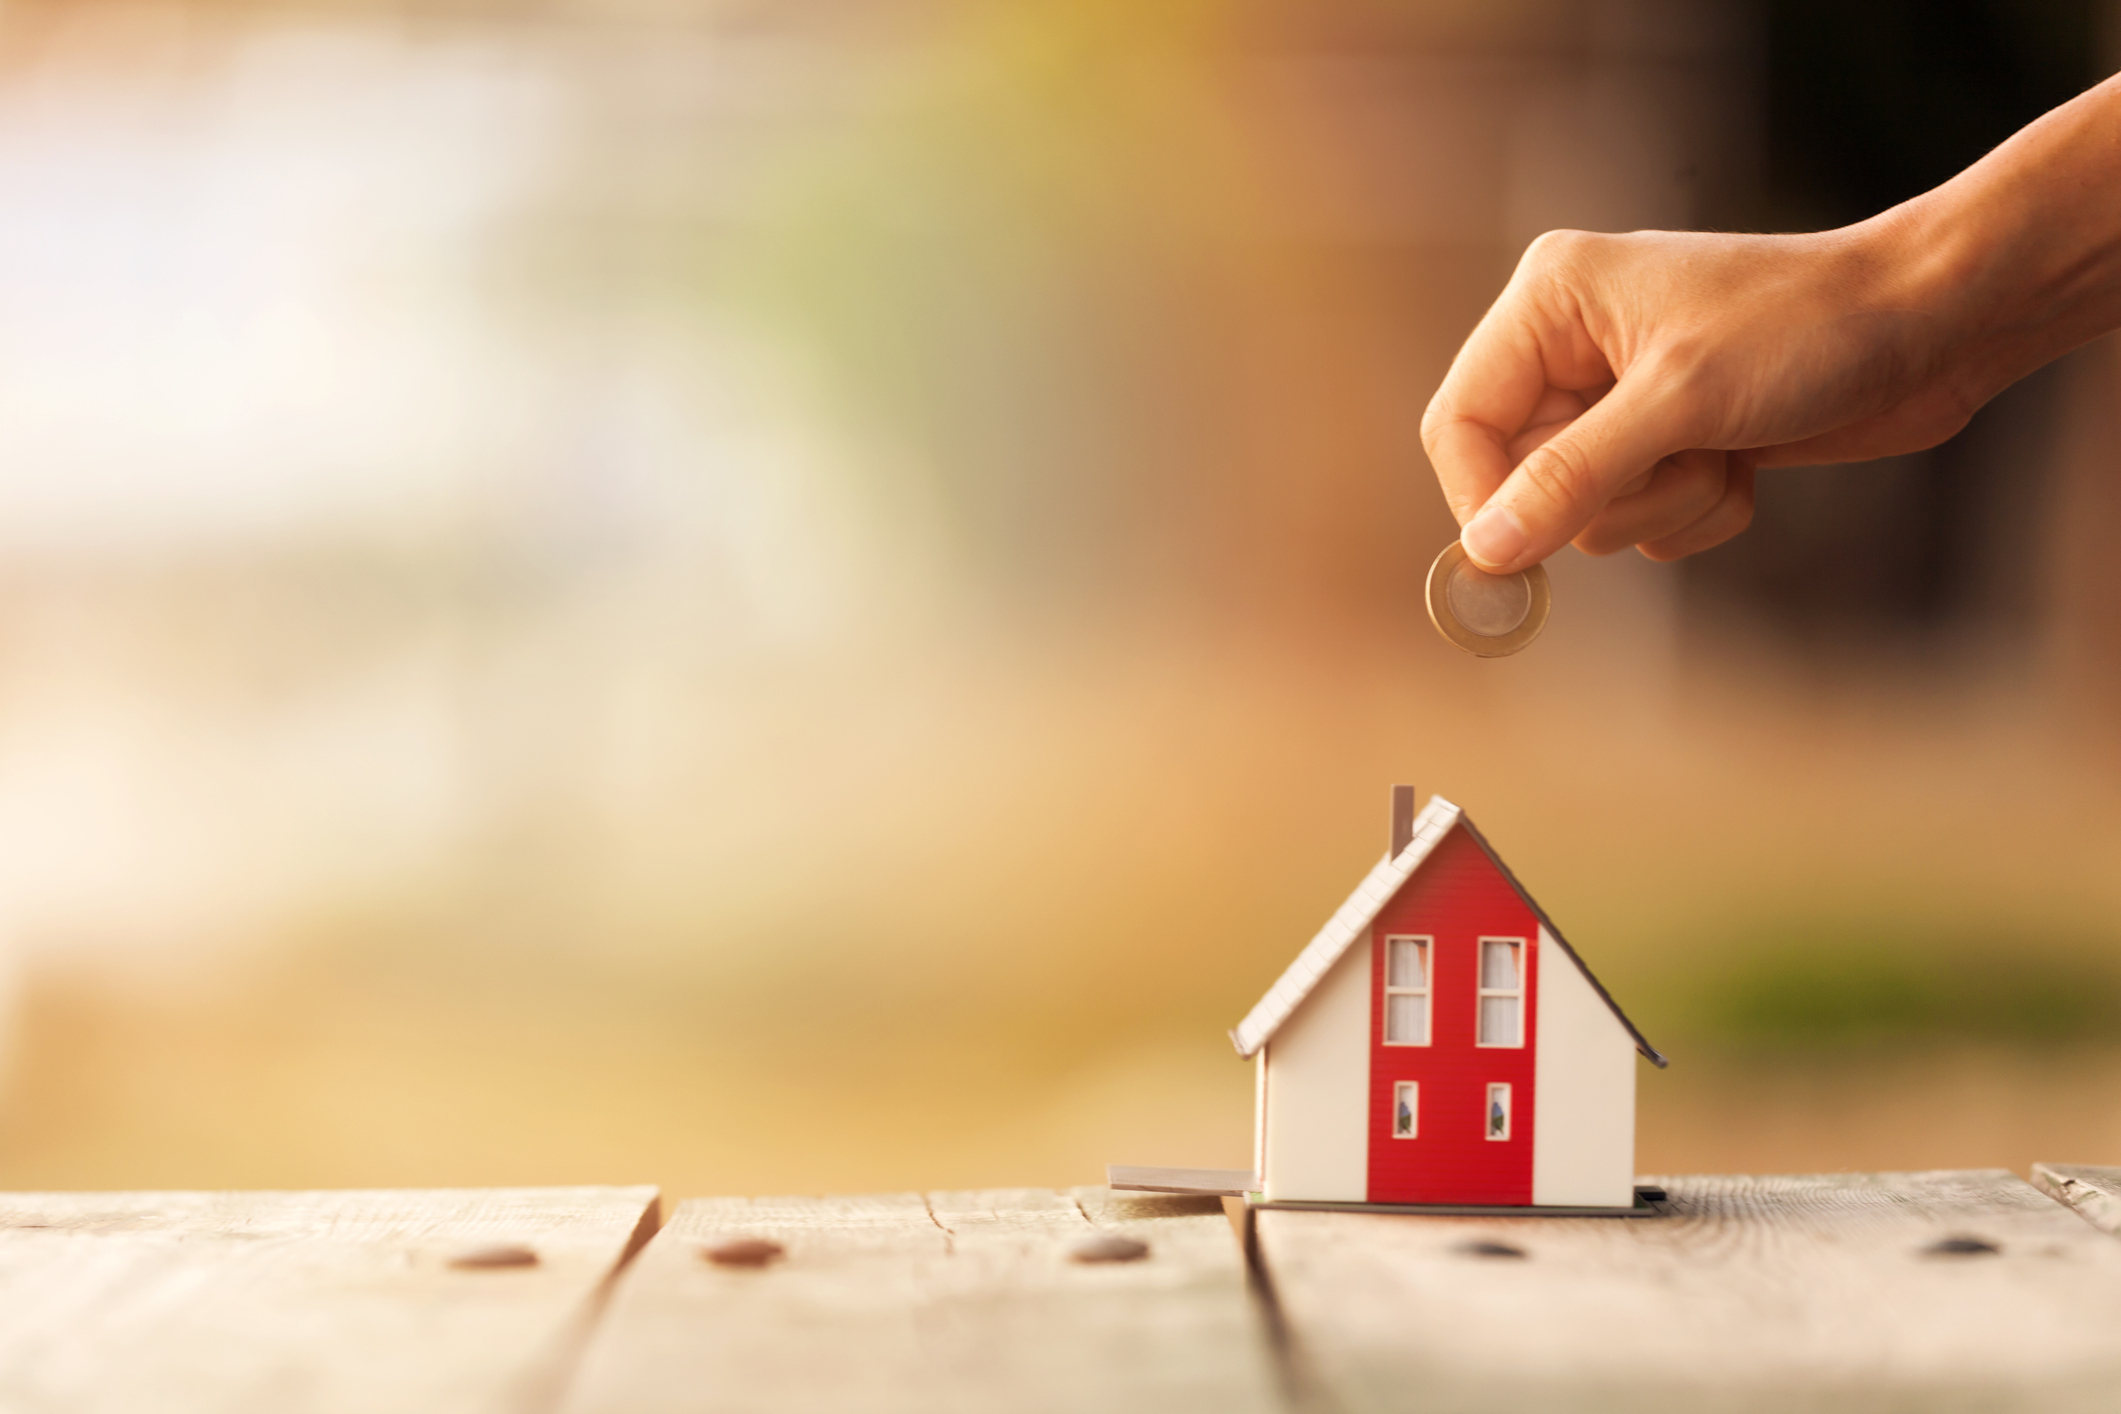 Know Your Rights for Mortgages and Financing a Home | Dial-A-Law